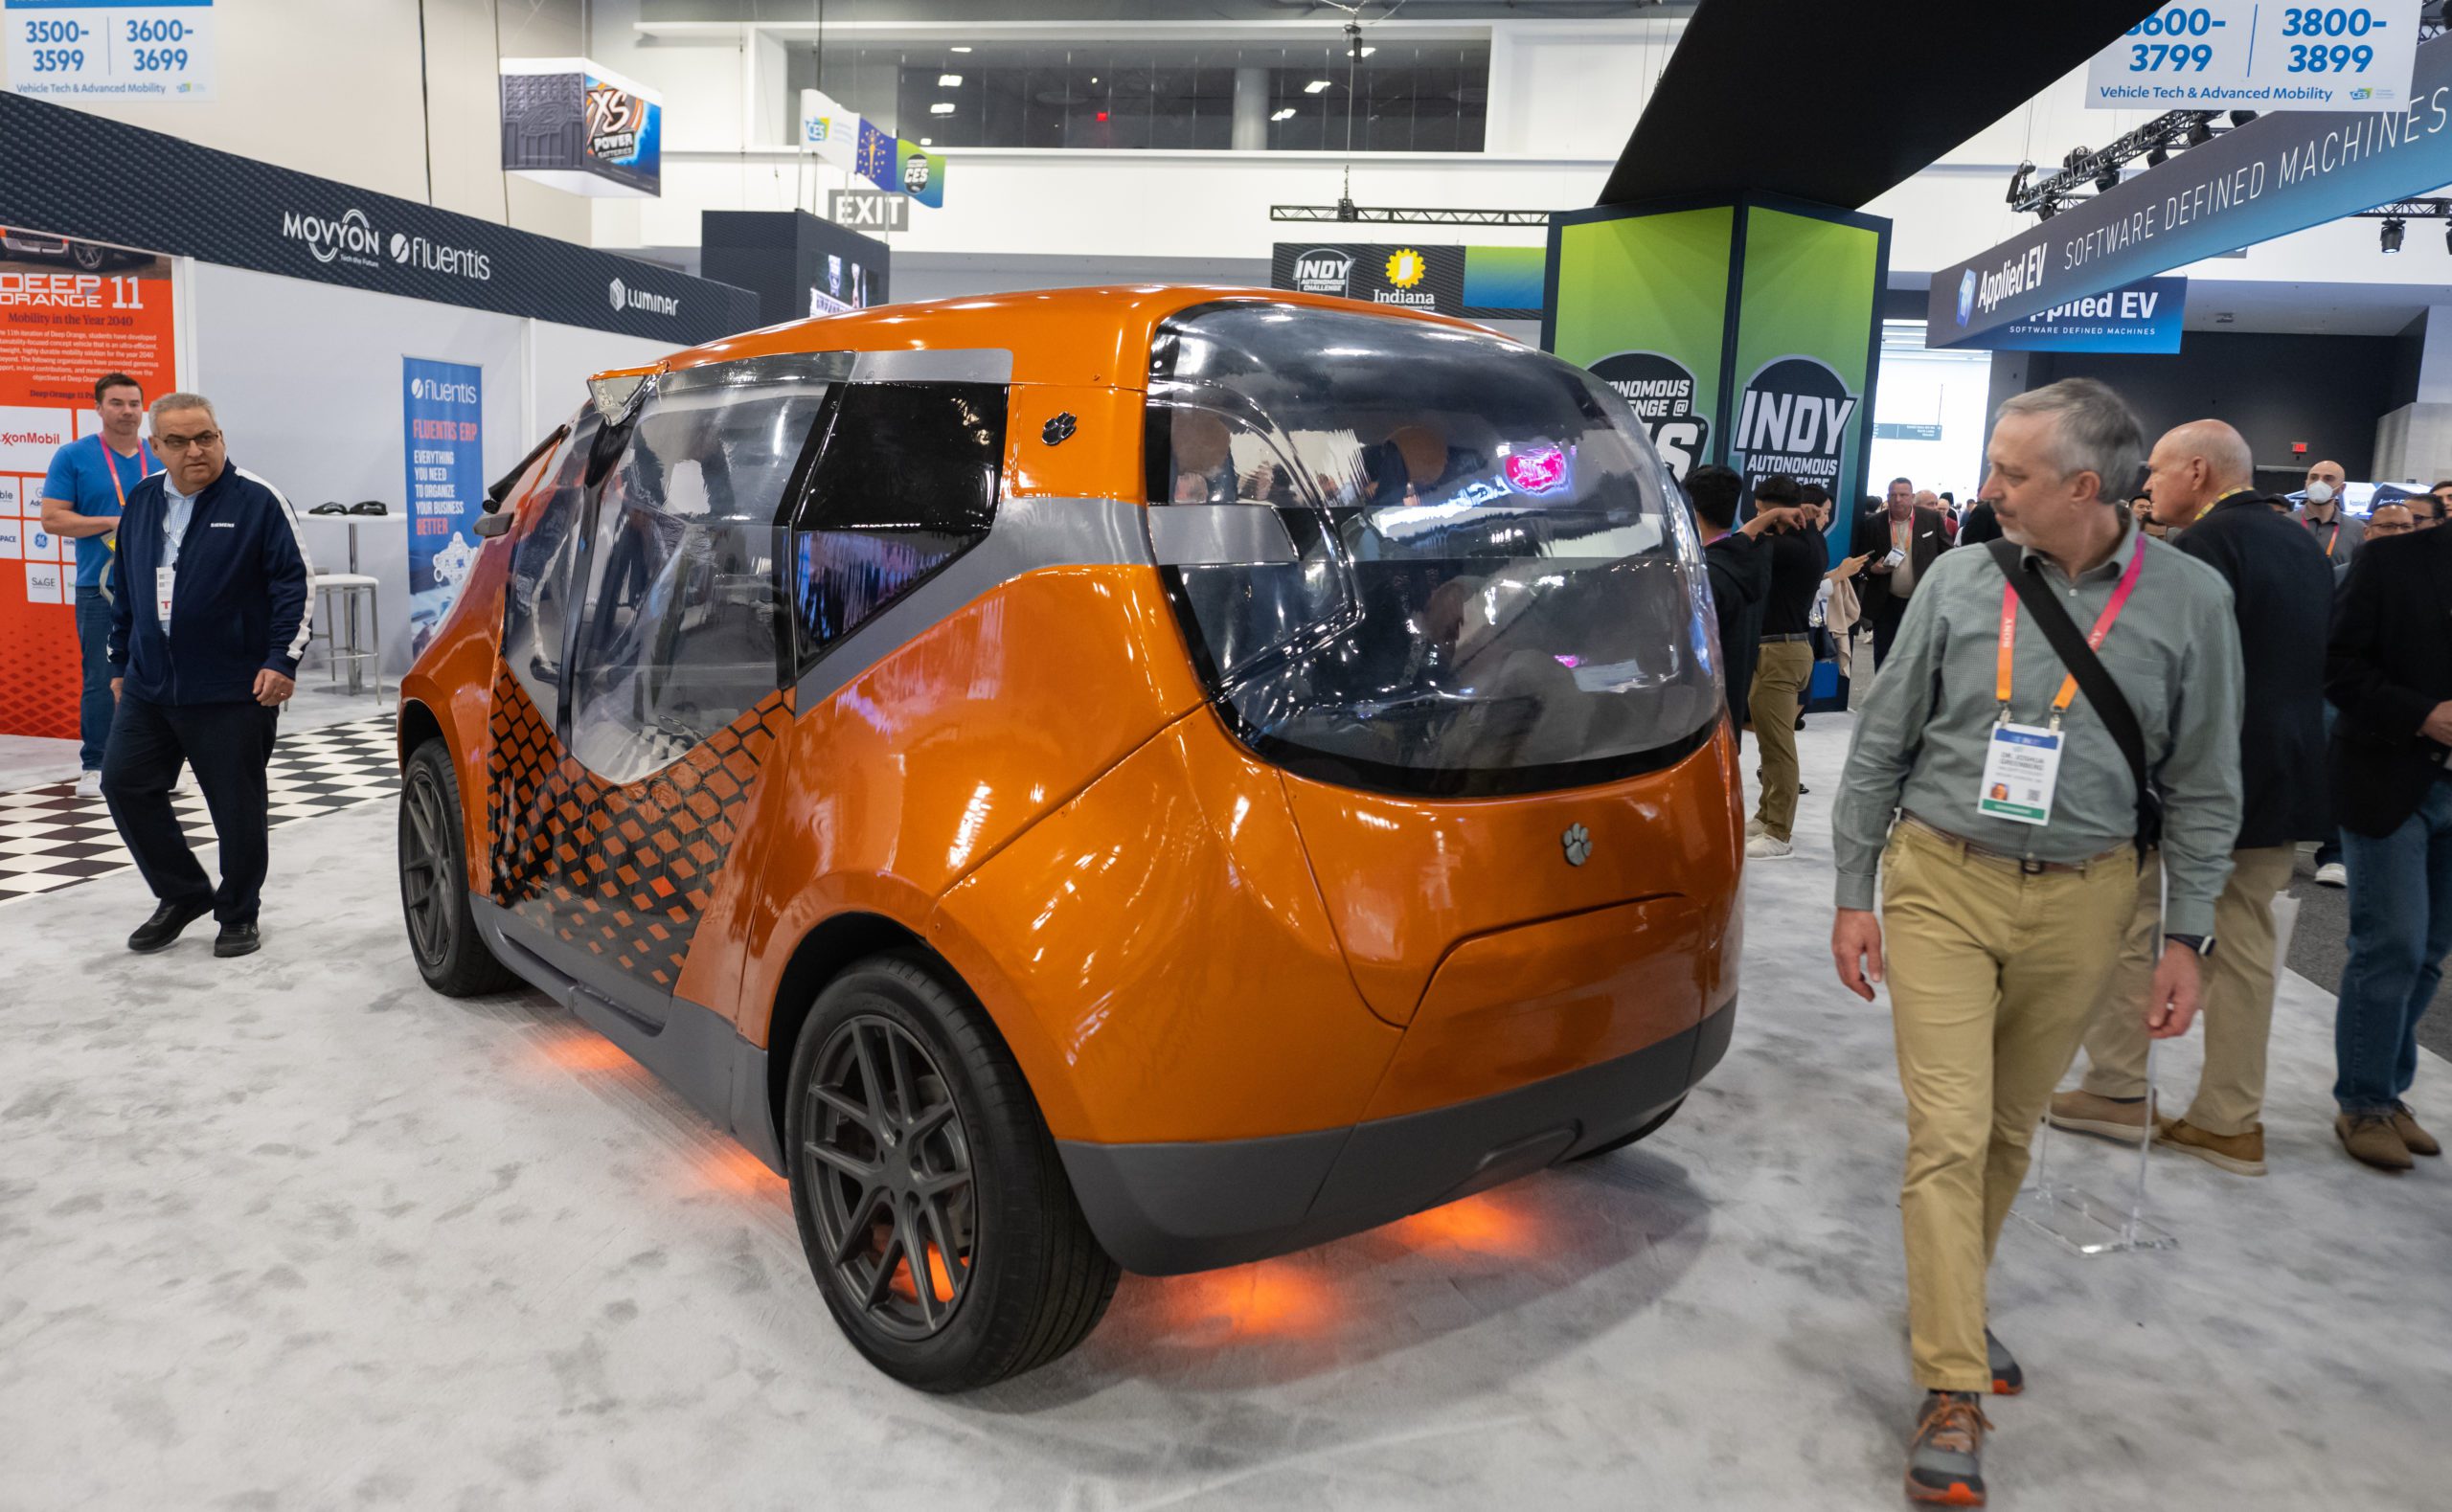 The Deep Orange 11, an orange vehicle, sits in a large space surrounded by people wearing lanyards as they view the car.